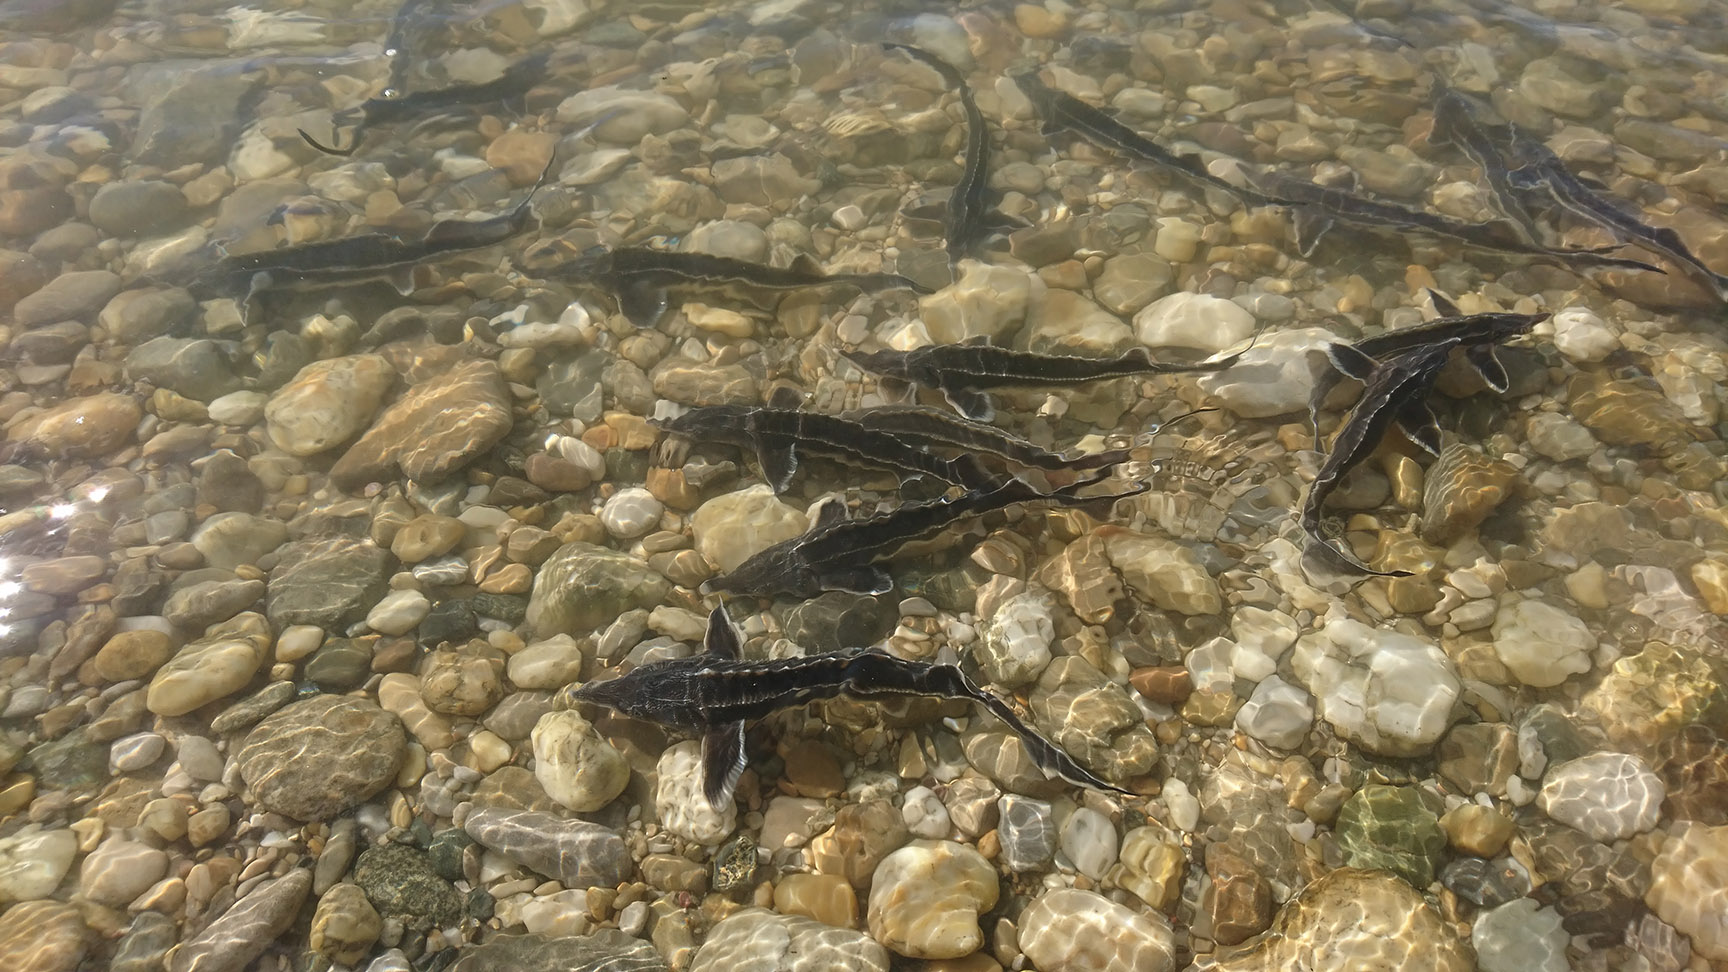 Release of juvenile sterlets (Acipenser ruthenus) for supportive stocking in the Danube River. 